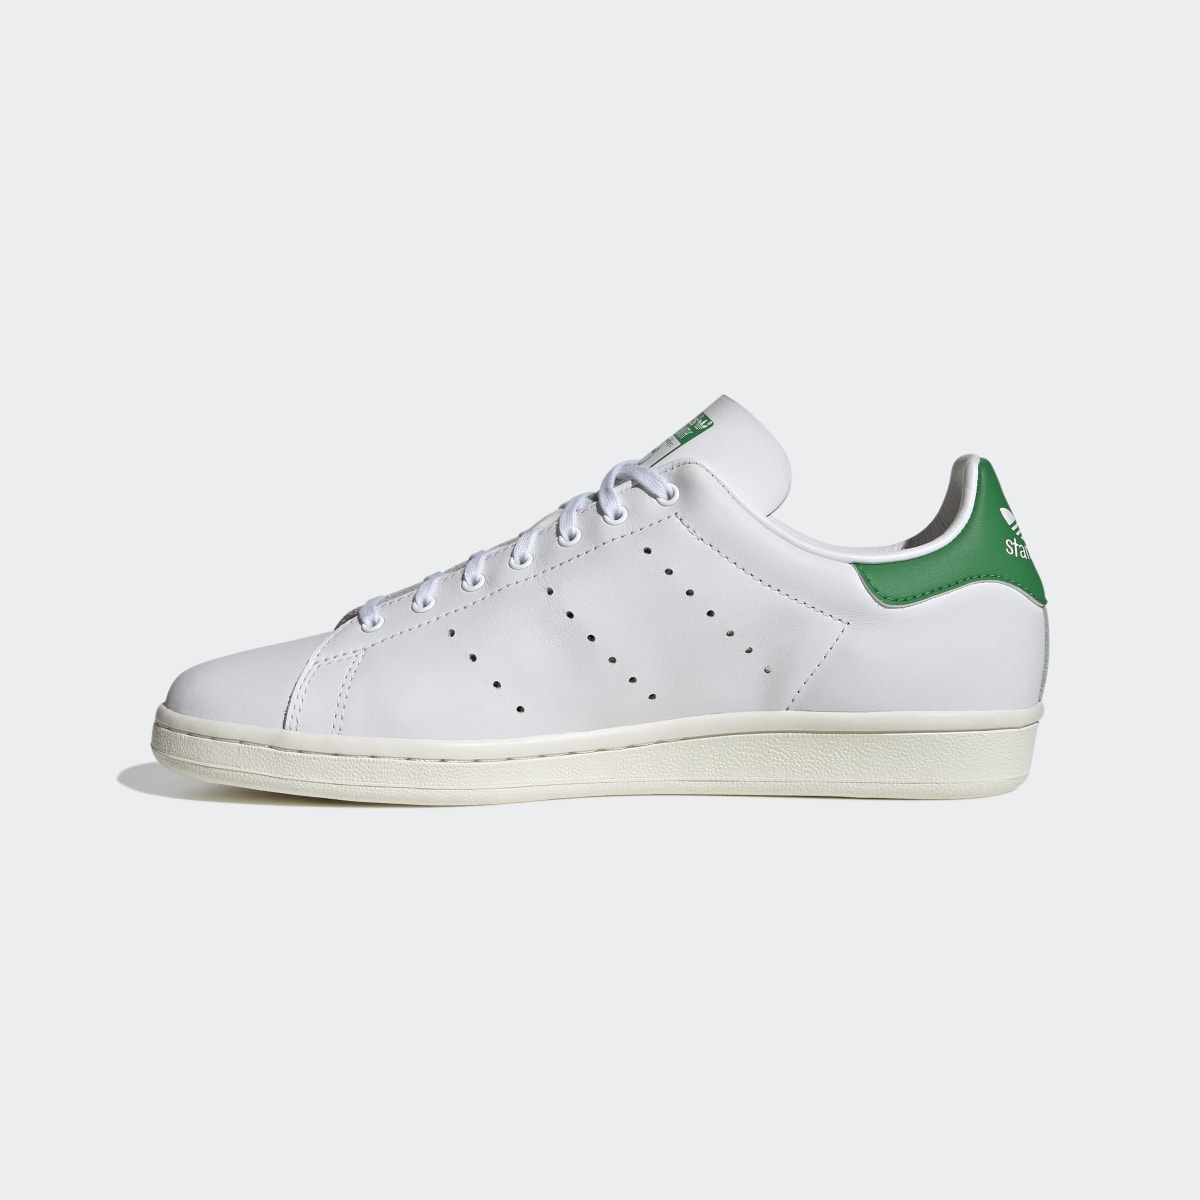 Adidas Stan Smith 80s Shoes. 7